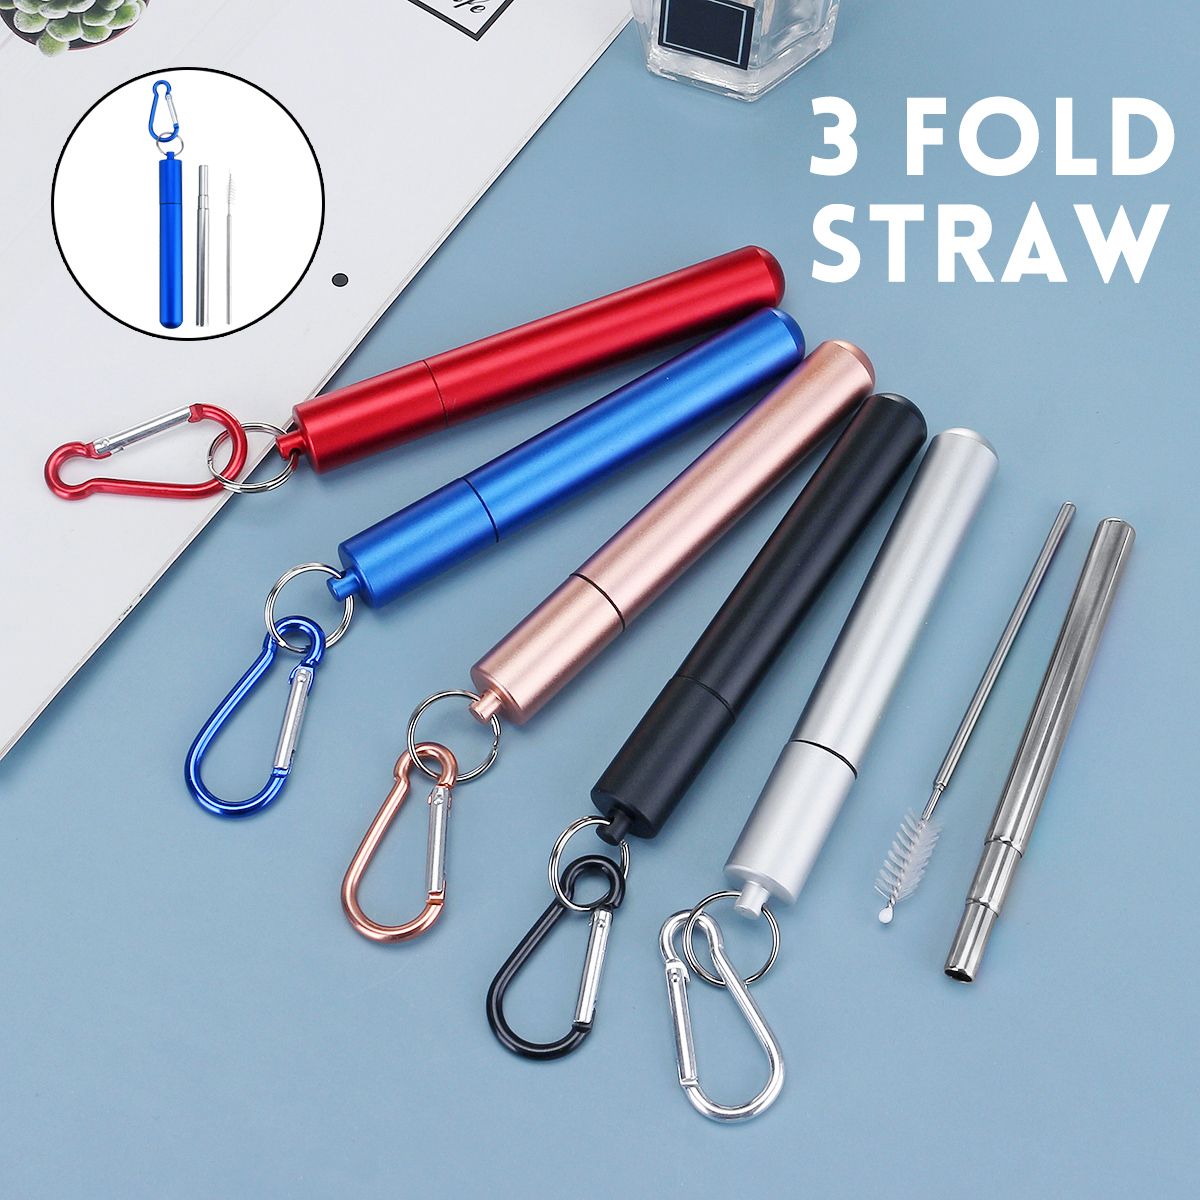 Reusable-Collapsible-Straw-with-Case-amp-Brush-Retractable-Stainless-Steel-Metal-Drinking-Straws-1626029